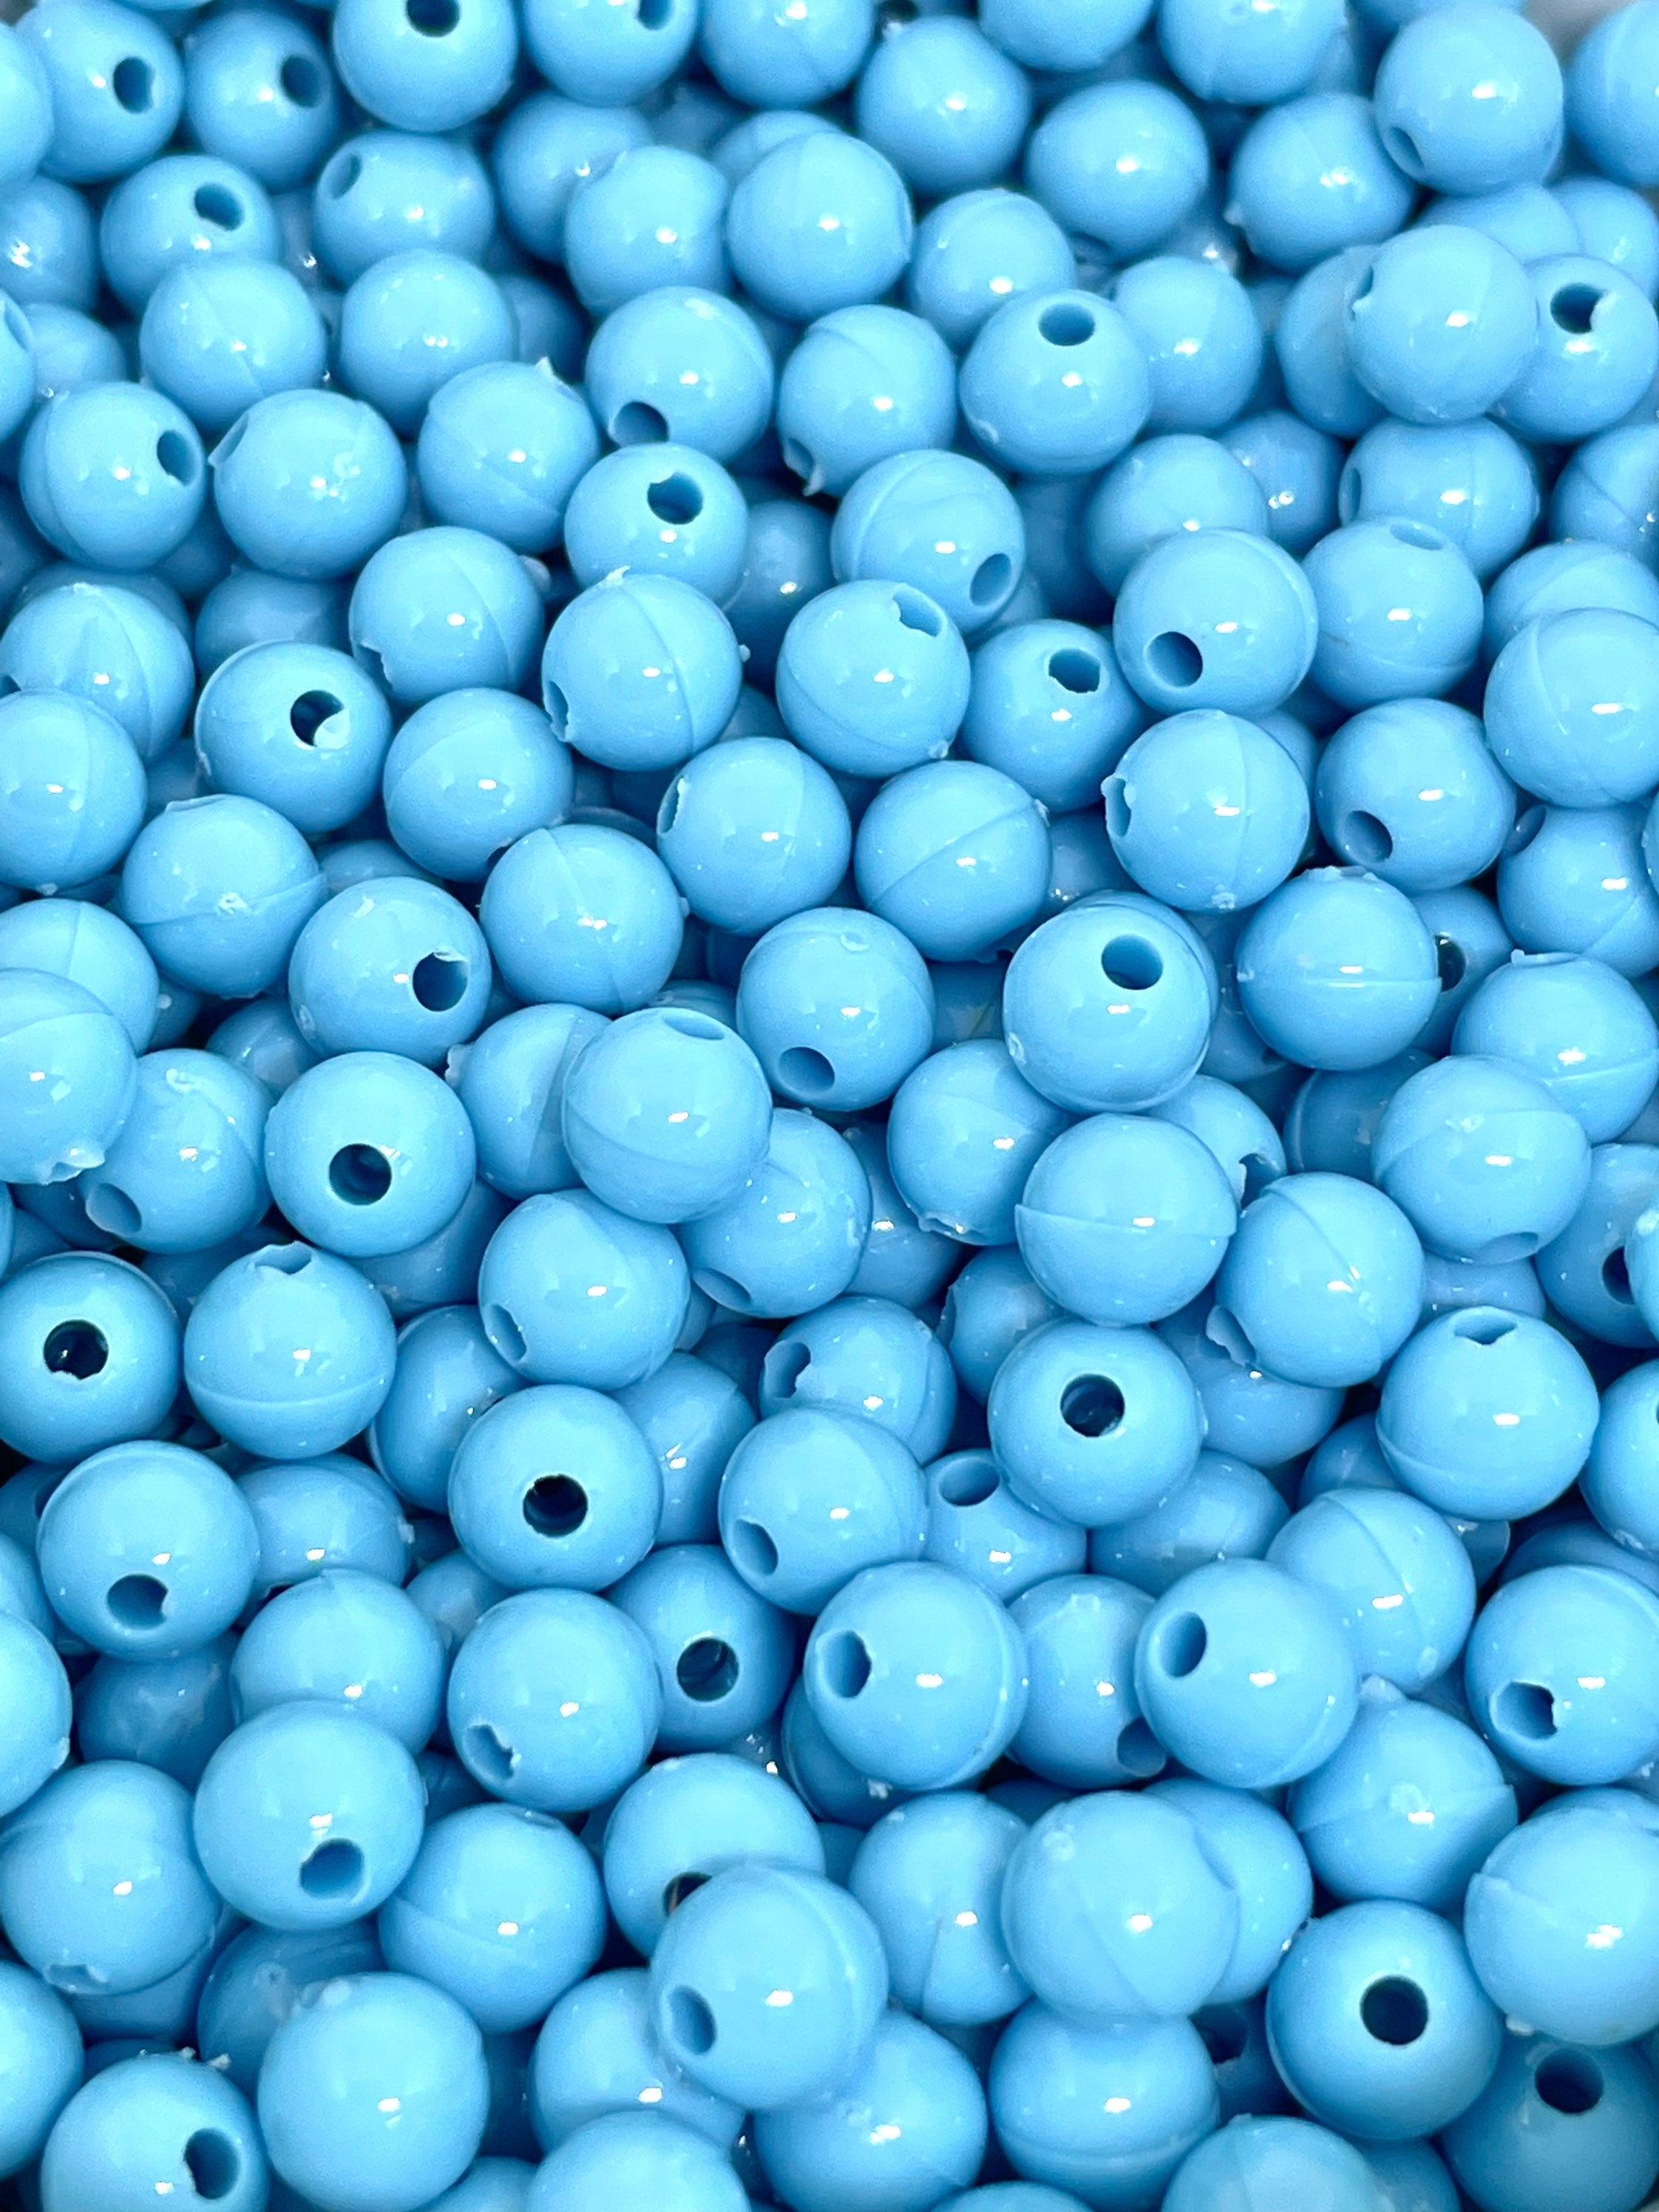 Baby Blue Round Beads for Bracelet, 6mm Beads for Necklace, Blue Beads, Round Blue Beads, Cute Blue Beads, Alice and Wonderland Beads